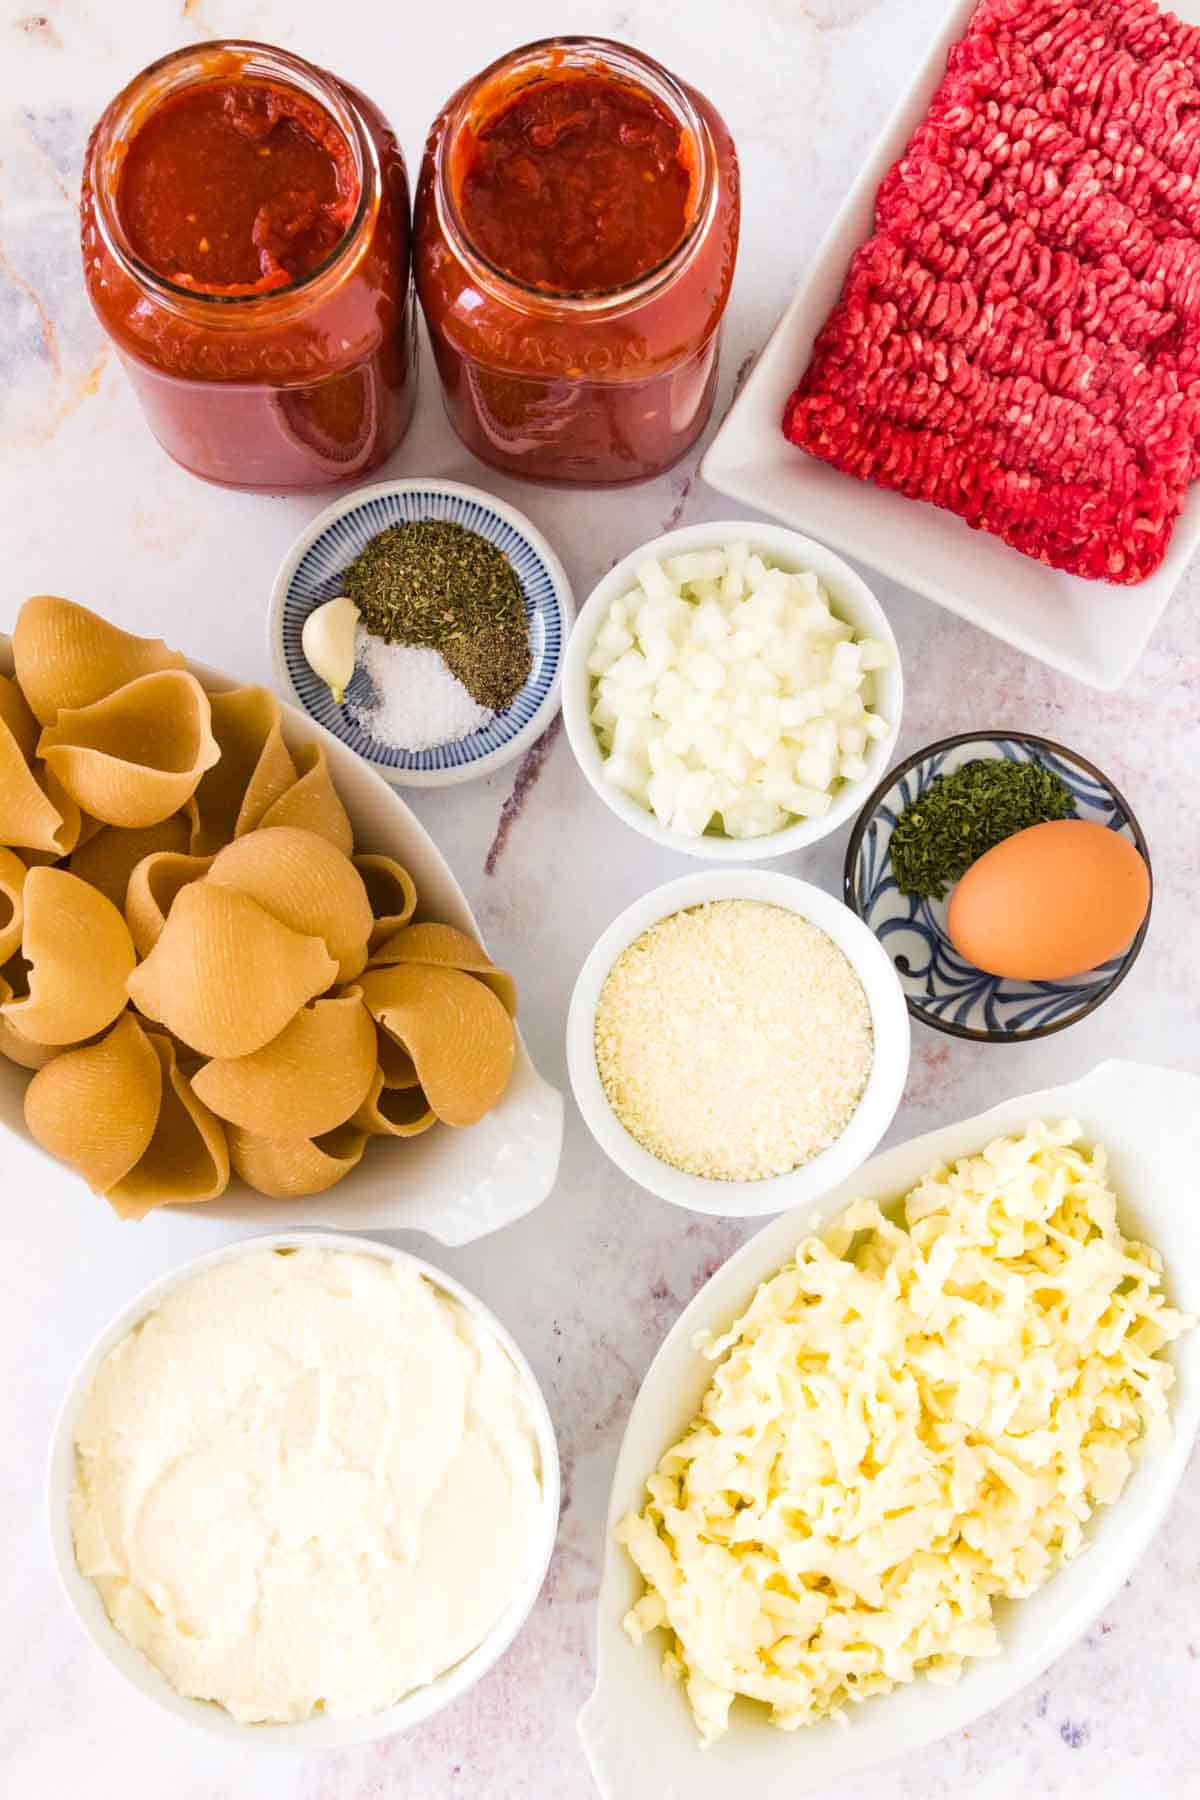 The ingredients for gluten-free stuffed shells.